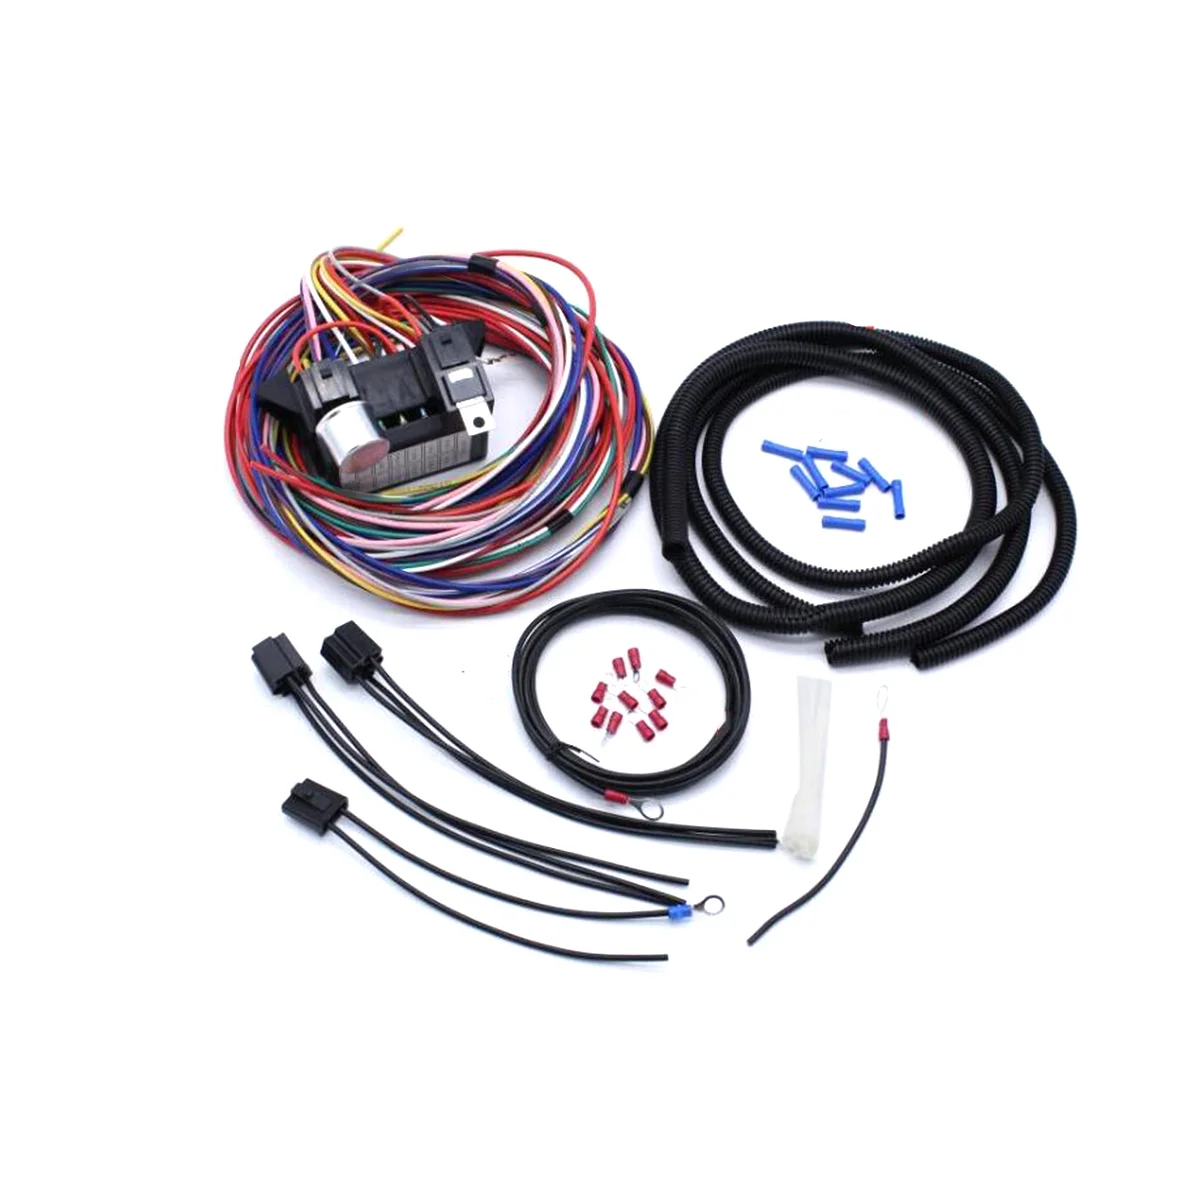 

For Muscle Car Hot Rot Wiring Street Rod Rat Rod for Ford Chevy 12 Circuit Universal Wiring Harness Kit